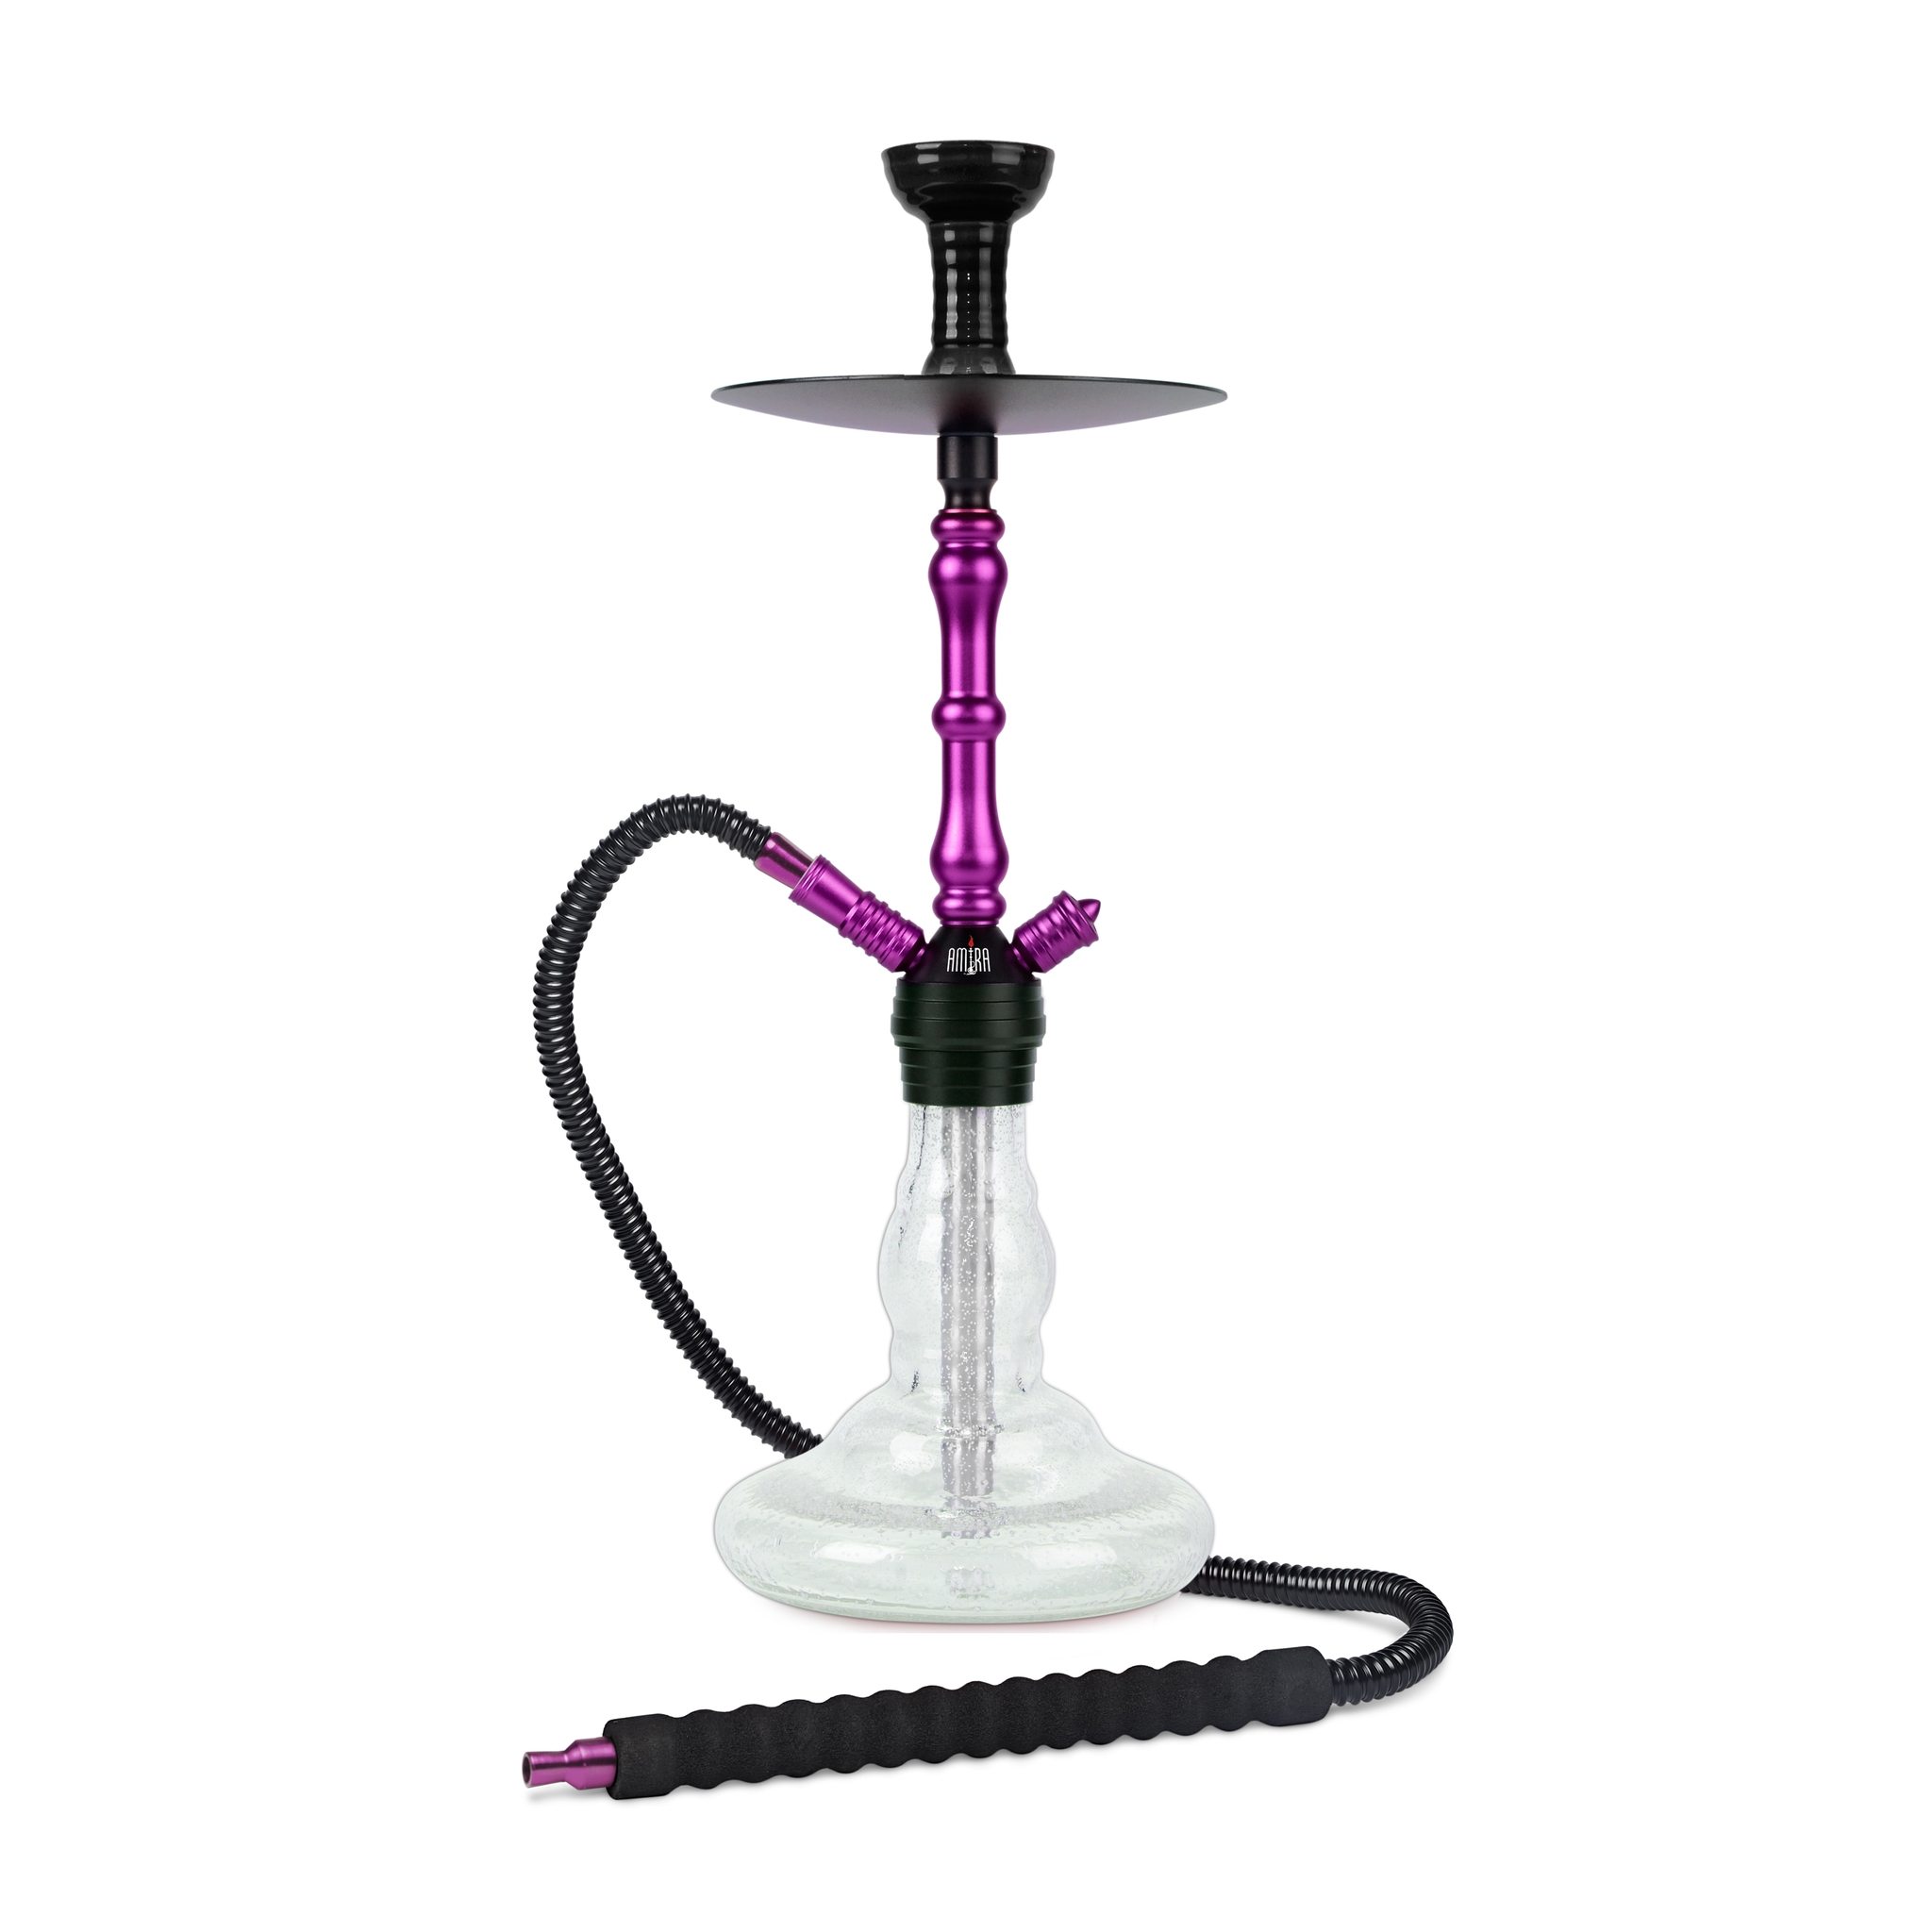 22 oz STRAIGHT thick GLOW IN THE DARK Sublimation ready hookah